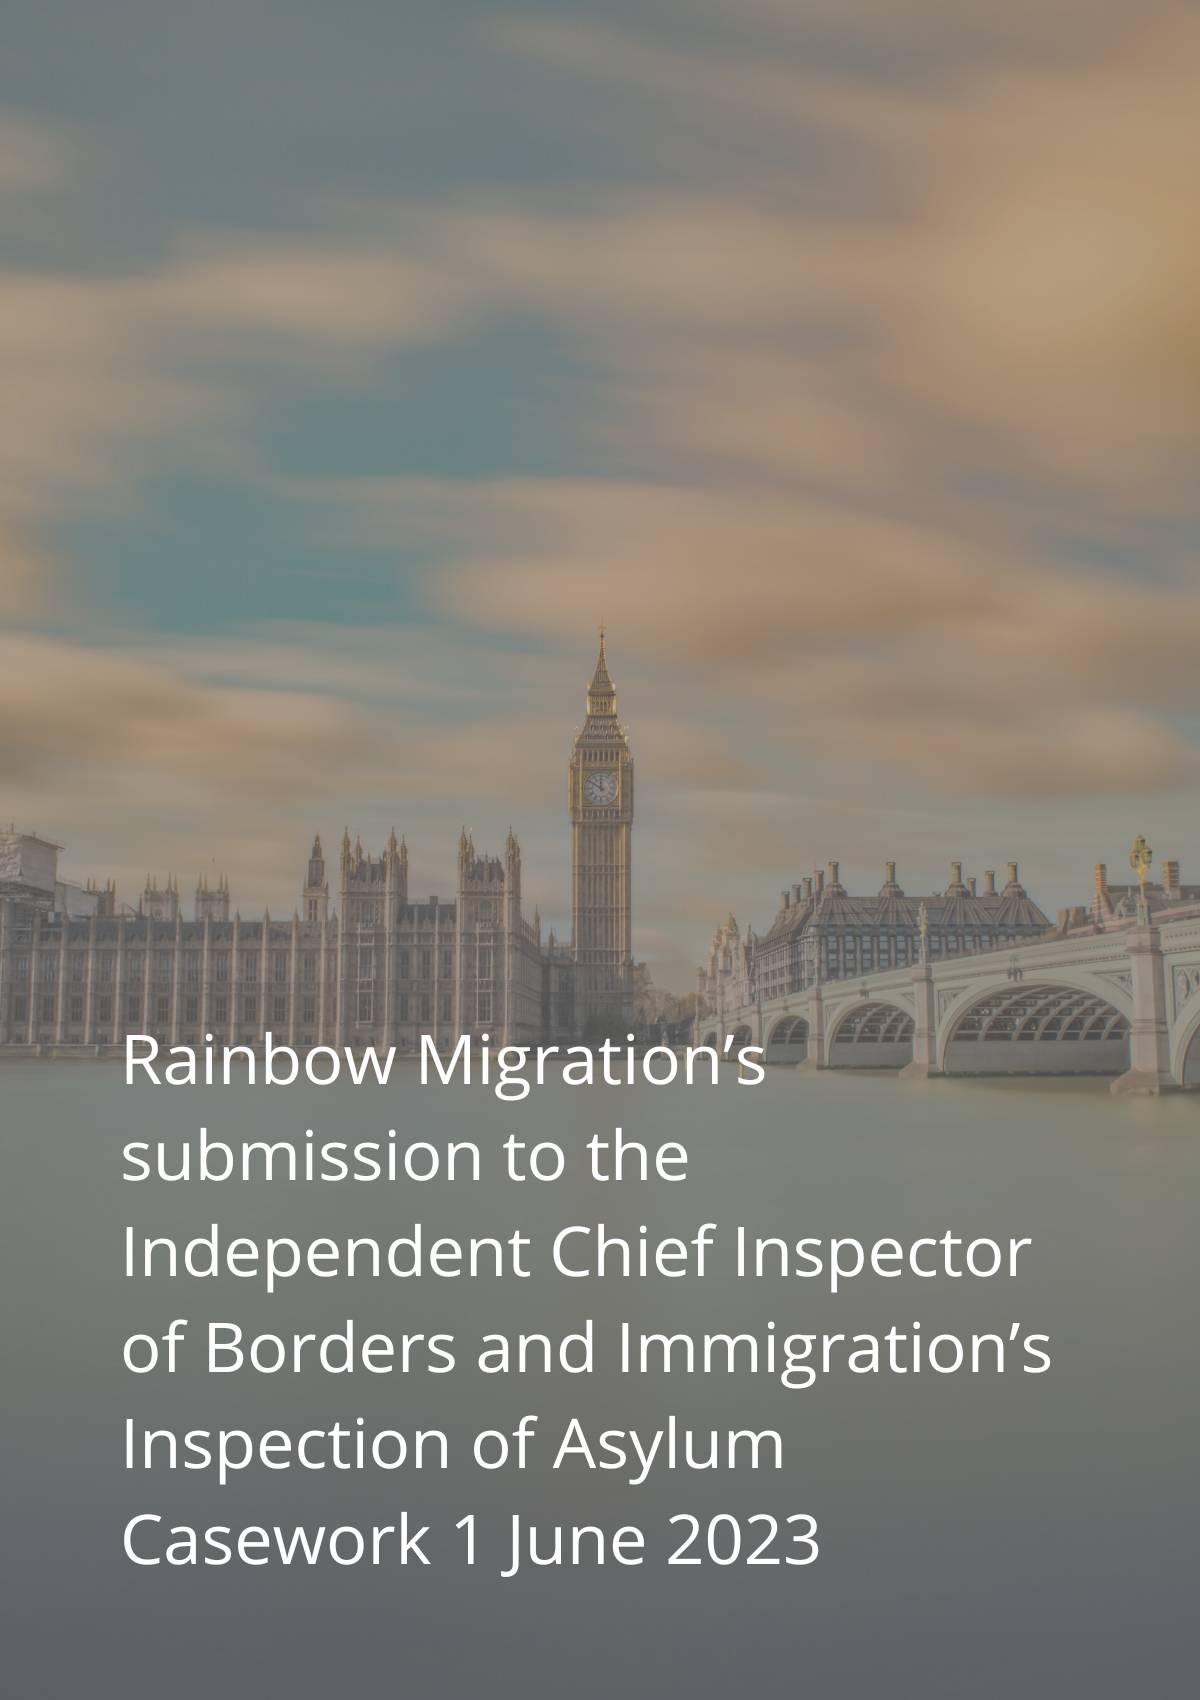 Rainbow migration's submission to the independent chief inspector of borders.